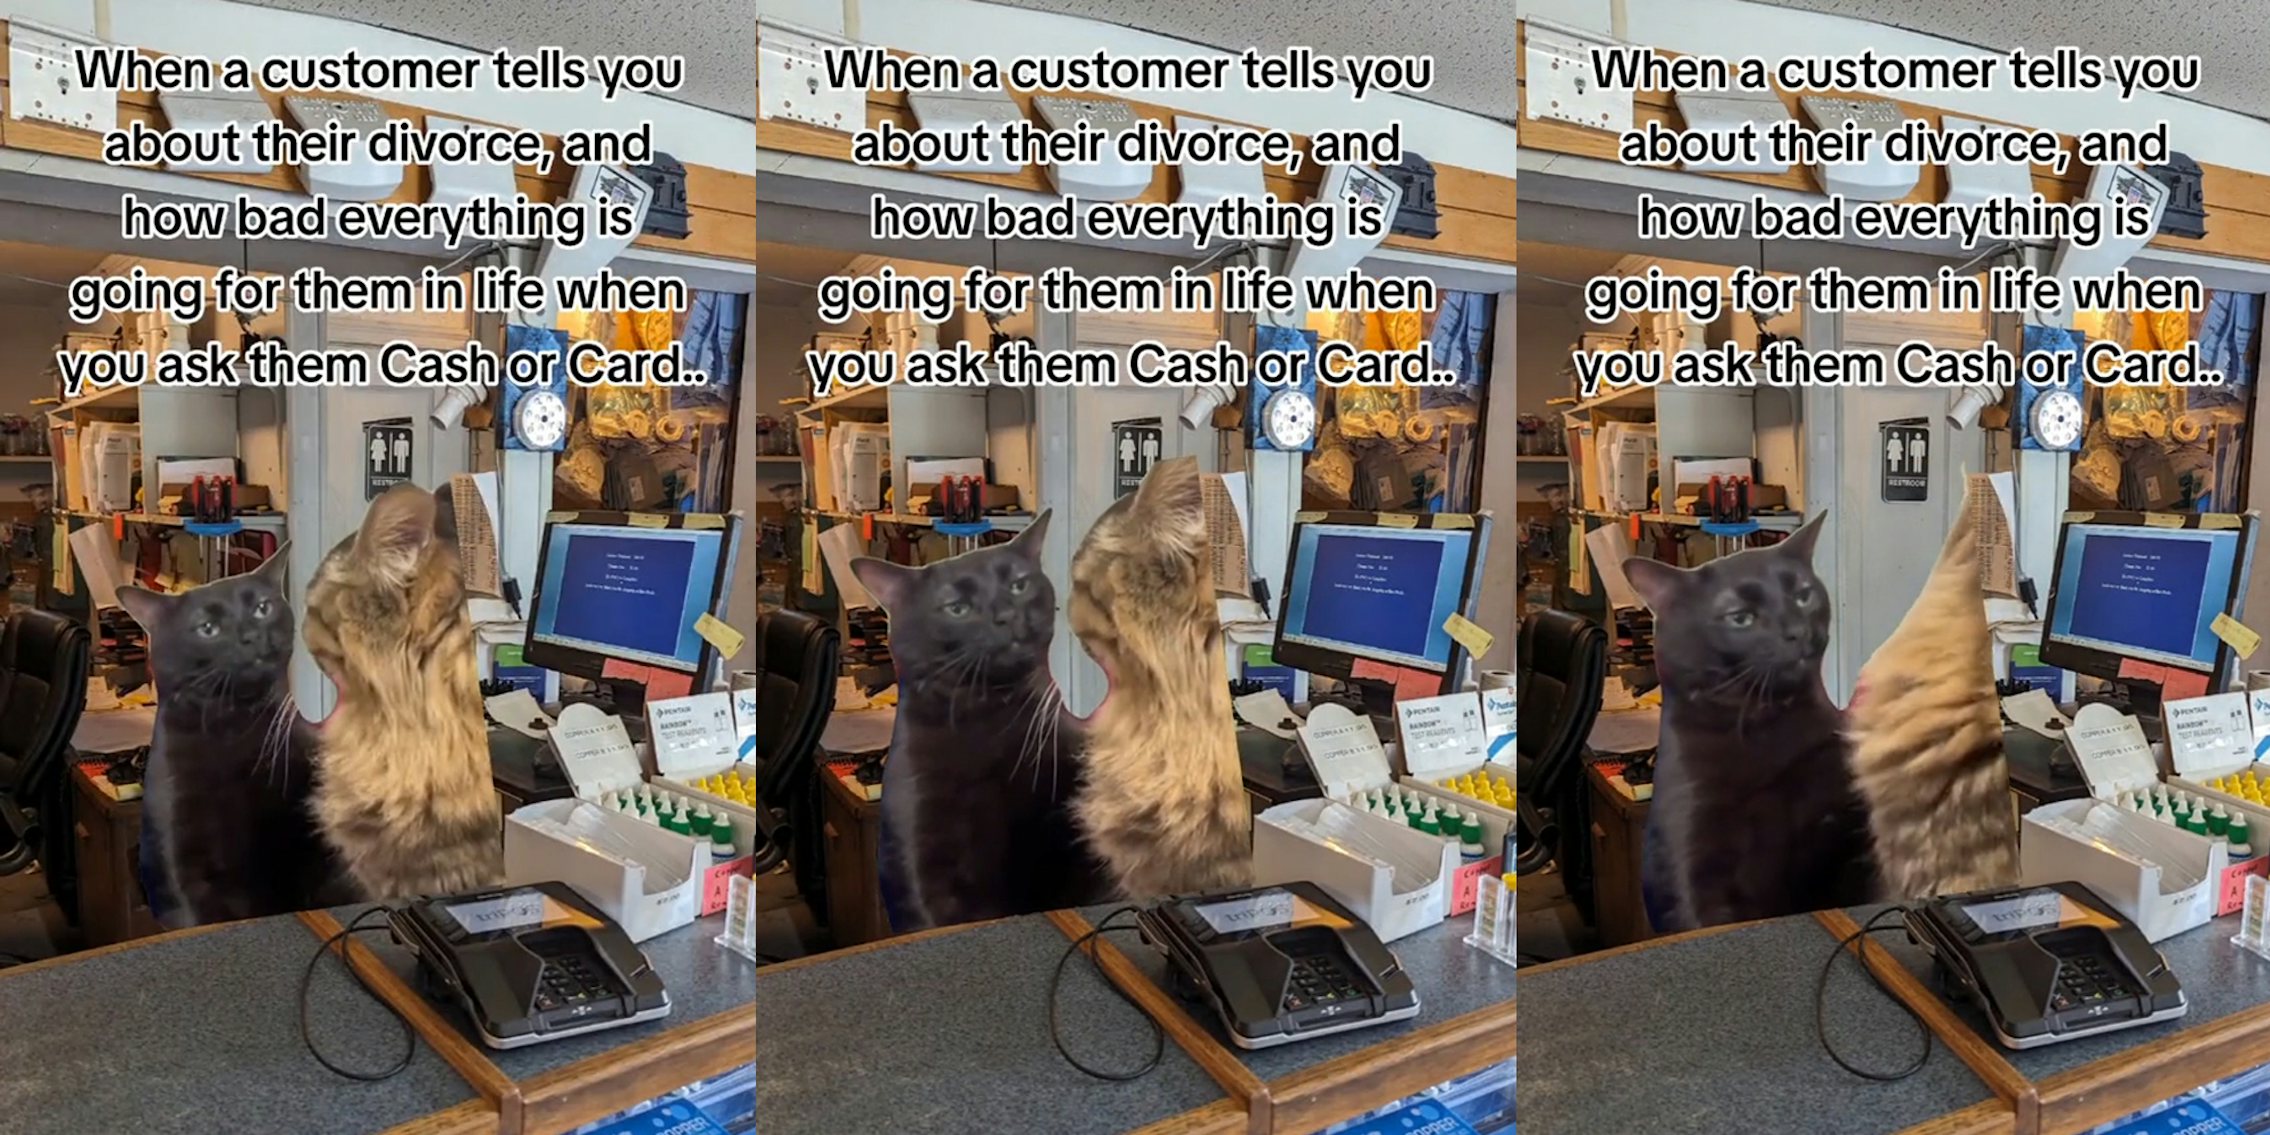 cat meme greenscreen TikTok over image of checkout with caption 'When a customer tells you about their divorce, and how bad everything is going for them in life when you ask them Cash or Card...' (l) cat meme greenscreen TikTok over image of checkout with caption 'When a customer tells you about their divorce, and how bad everything is going for them in life when you ask them Cash or Card...' (c) cat meme greenscreen TikTok over image of checkout with caption 'When a customer tells you about their divorce, and how bad everything is going for them in life when you ask them Cash or Card...' (r)